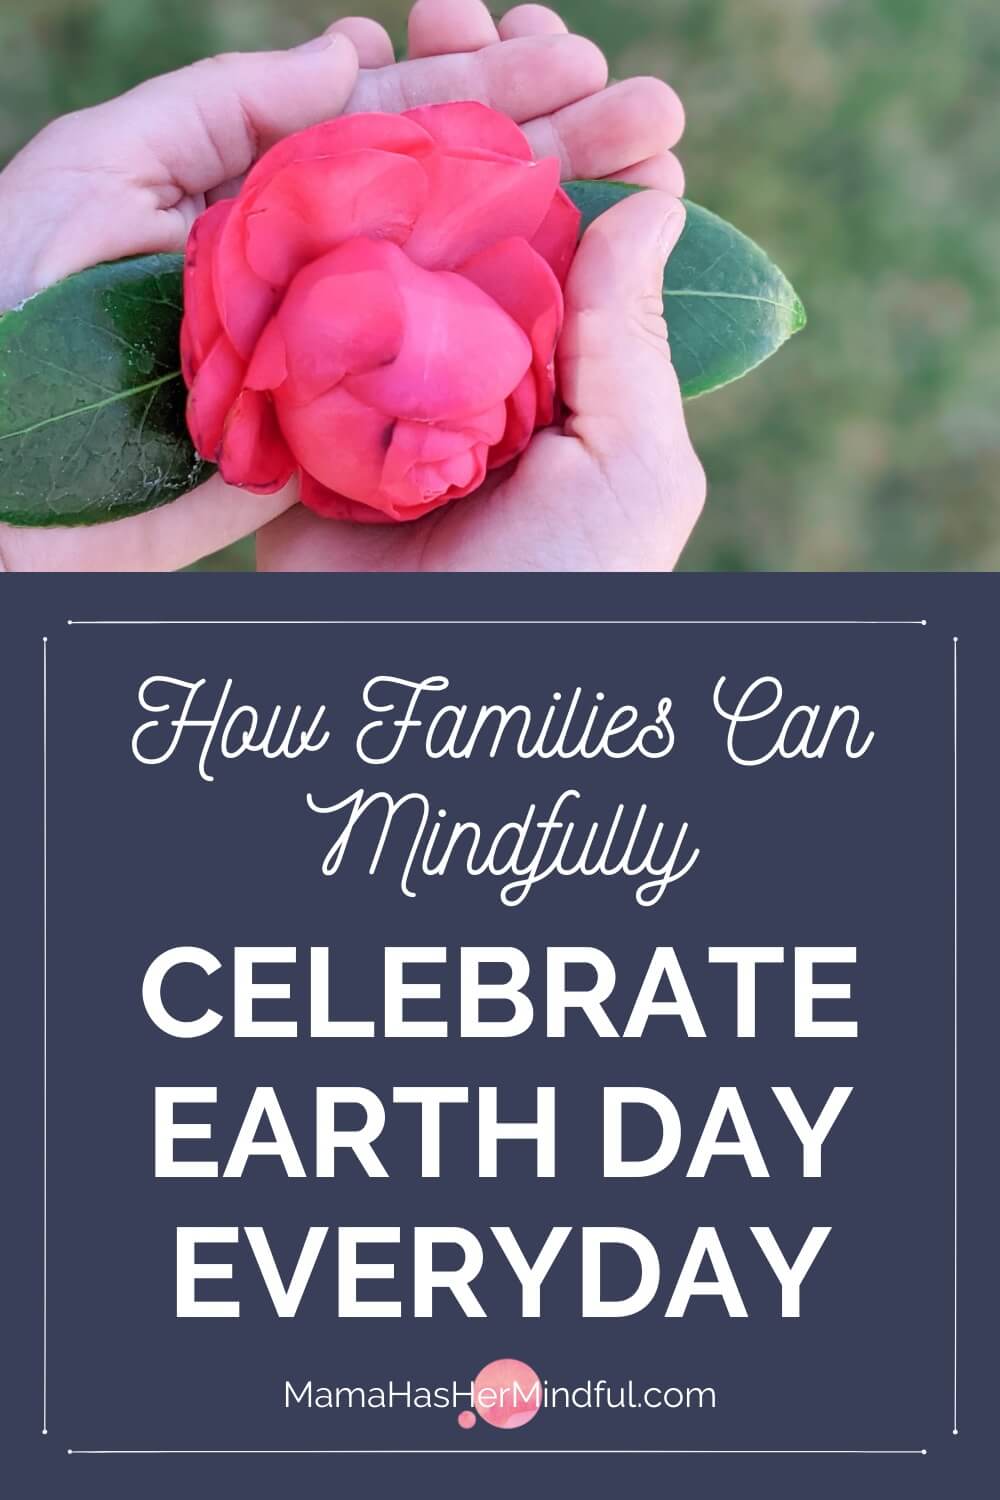 6 Ways Families Can Mindfully Celebrate Earth Day Everyday